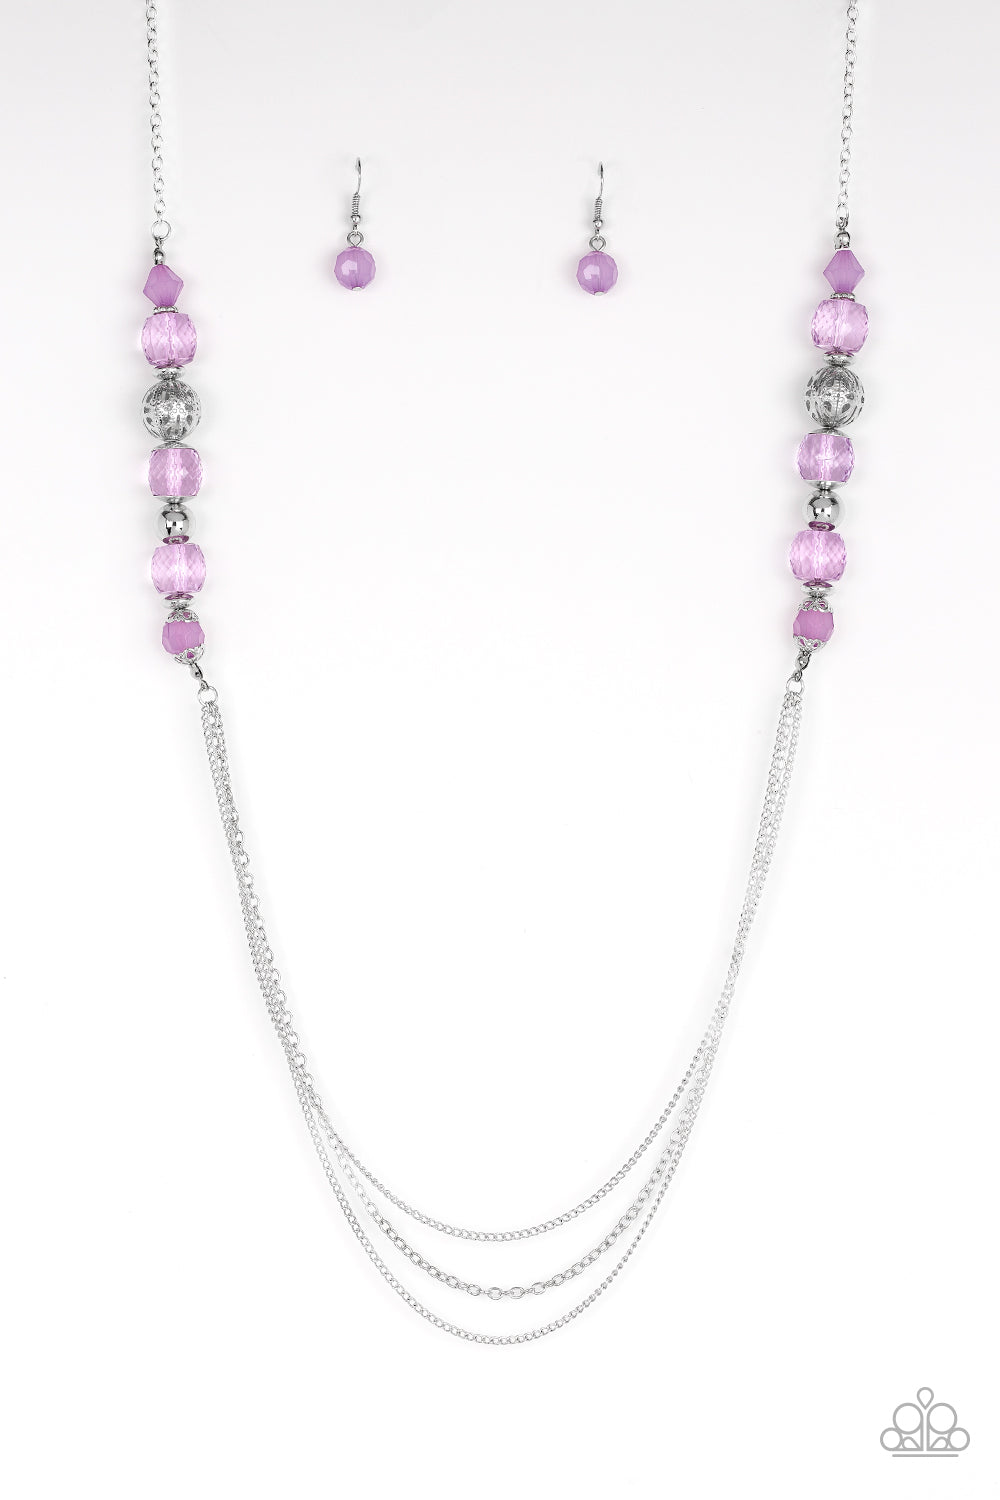 Native New Yorker - Purple Necklace